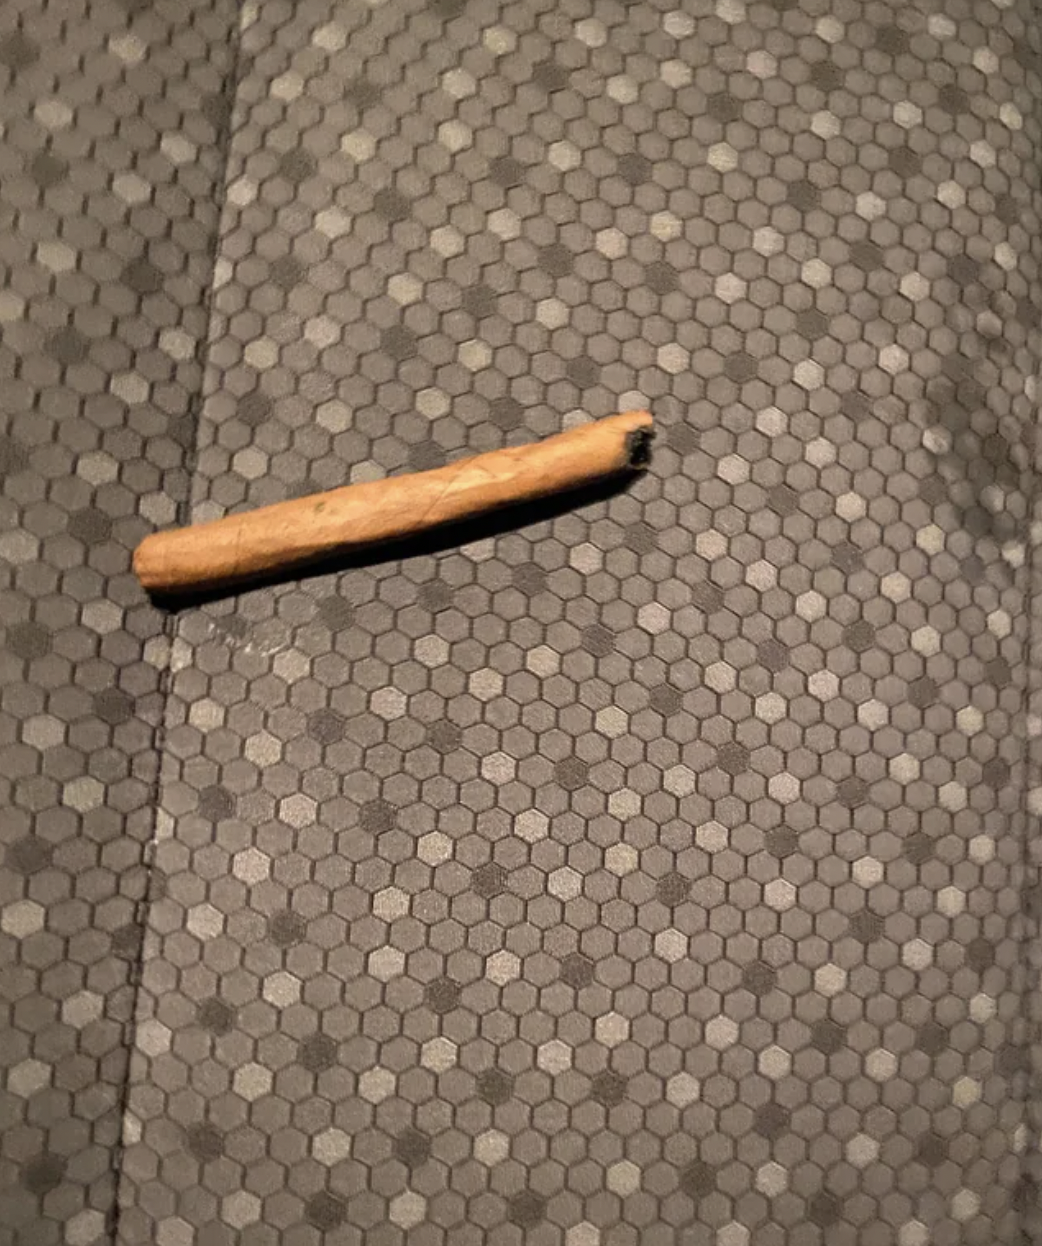 “Found this in my express rental just now. I don’t smoke but I left it on my neighbor's porch. His treat now. Hopefully it’s not laced.”